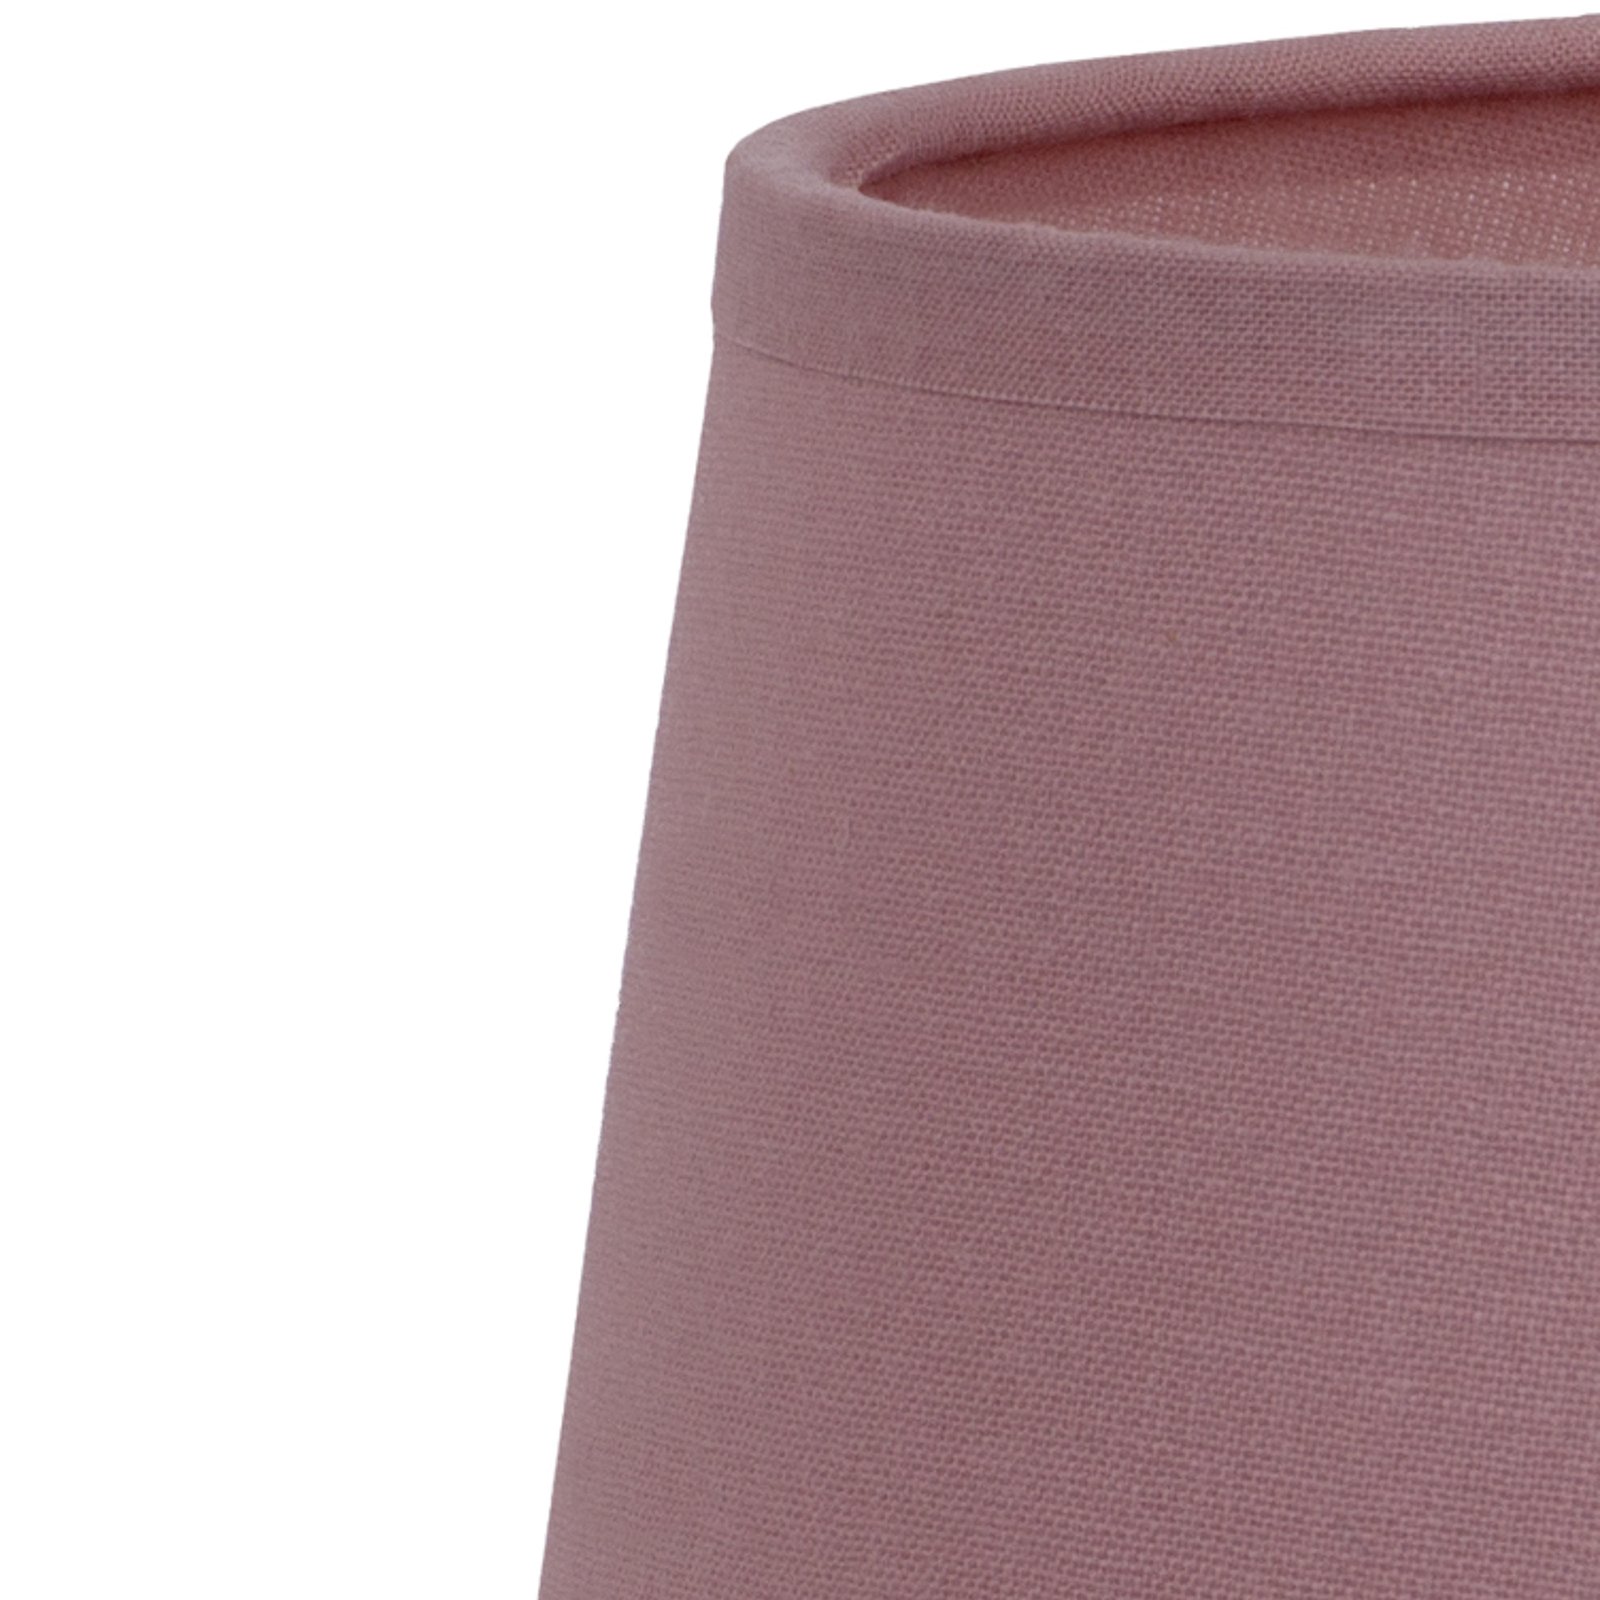 Classic S lampshade, powder pink